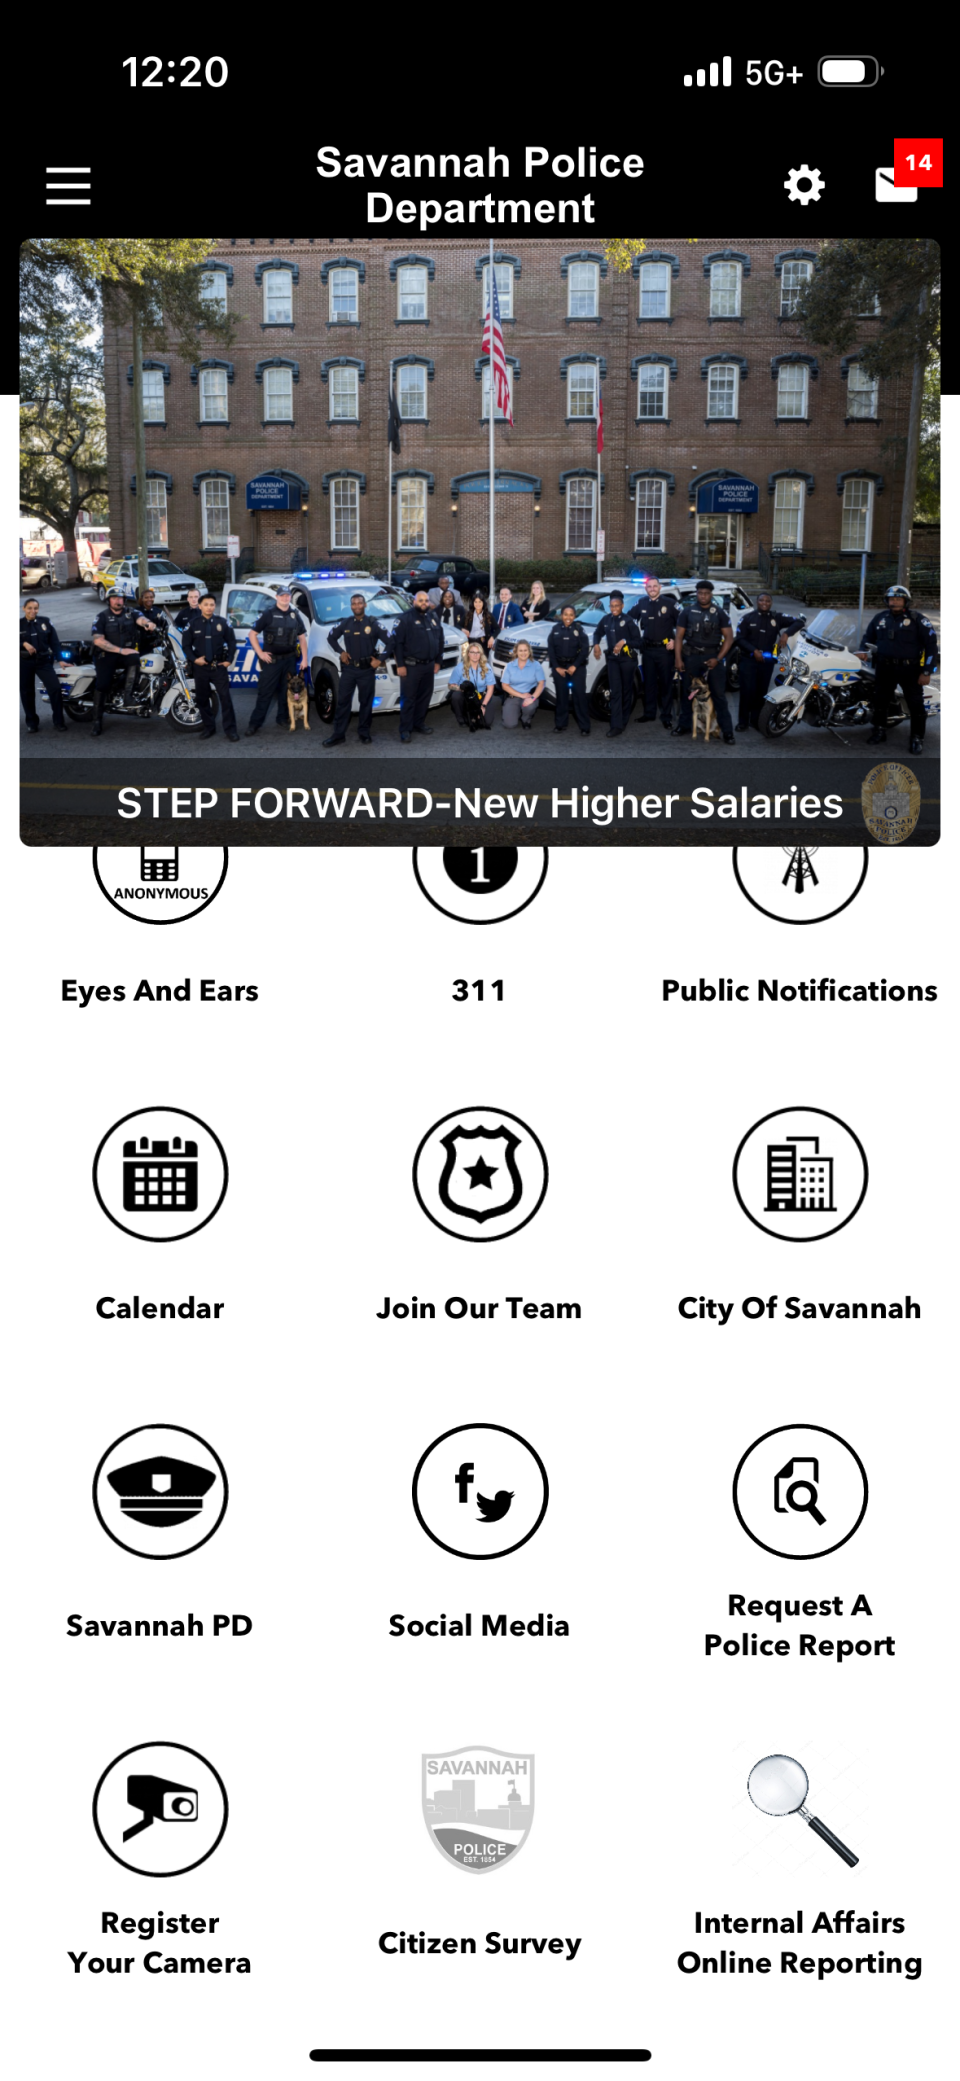 In the bottom-right corner of the Savannah Police app reads a widget, “Internal Affairs Online Reporting.”